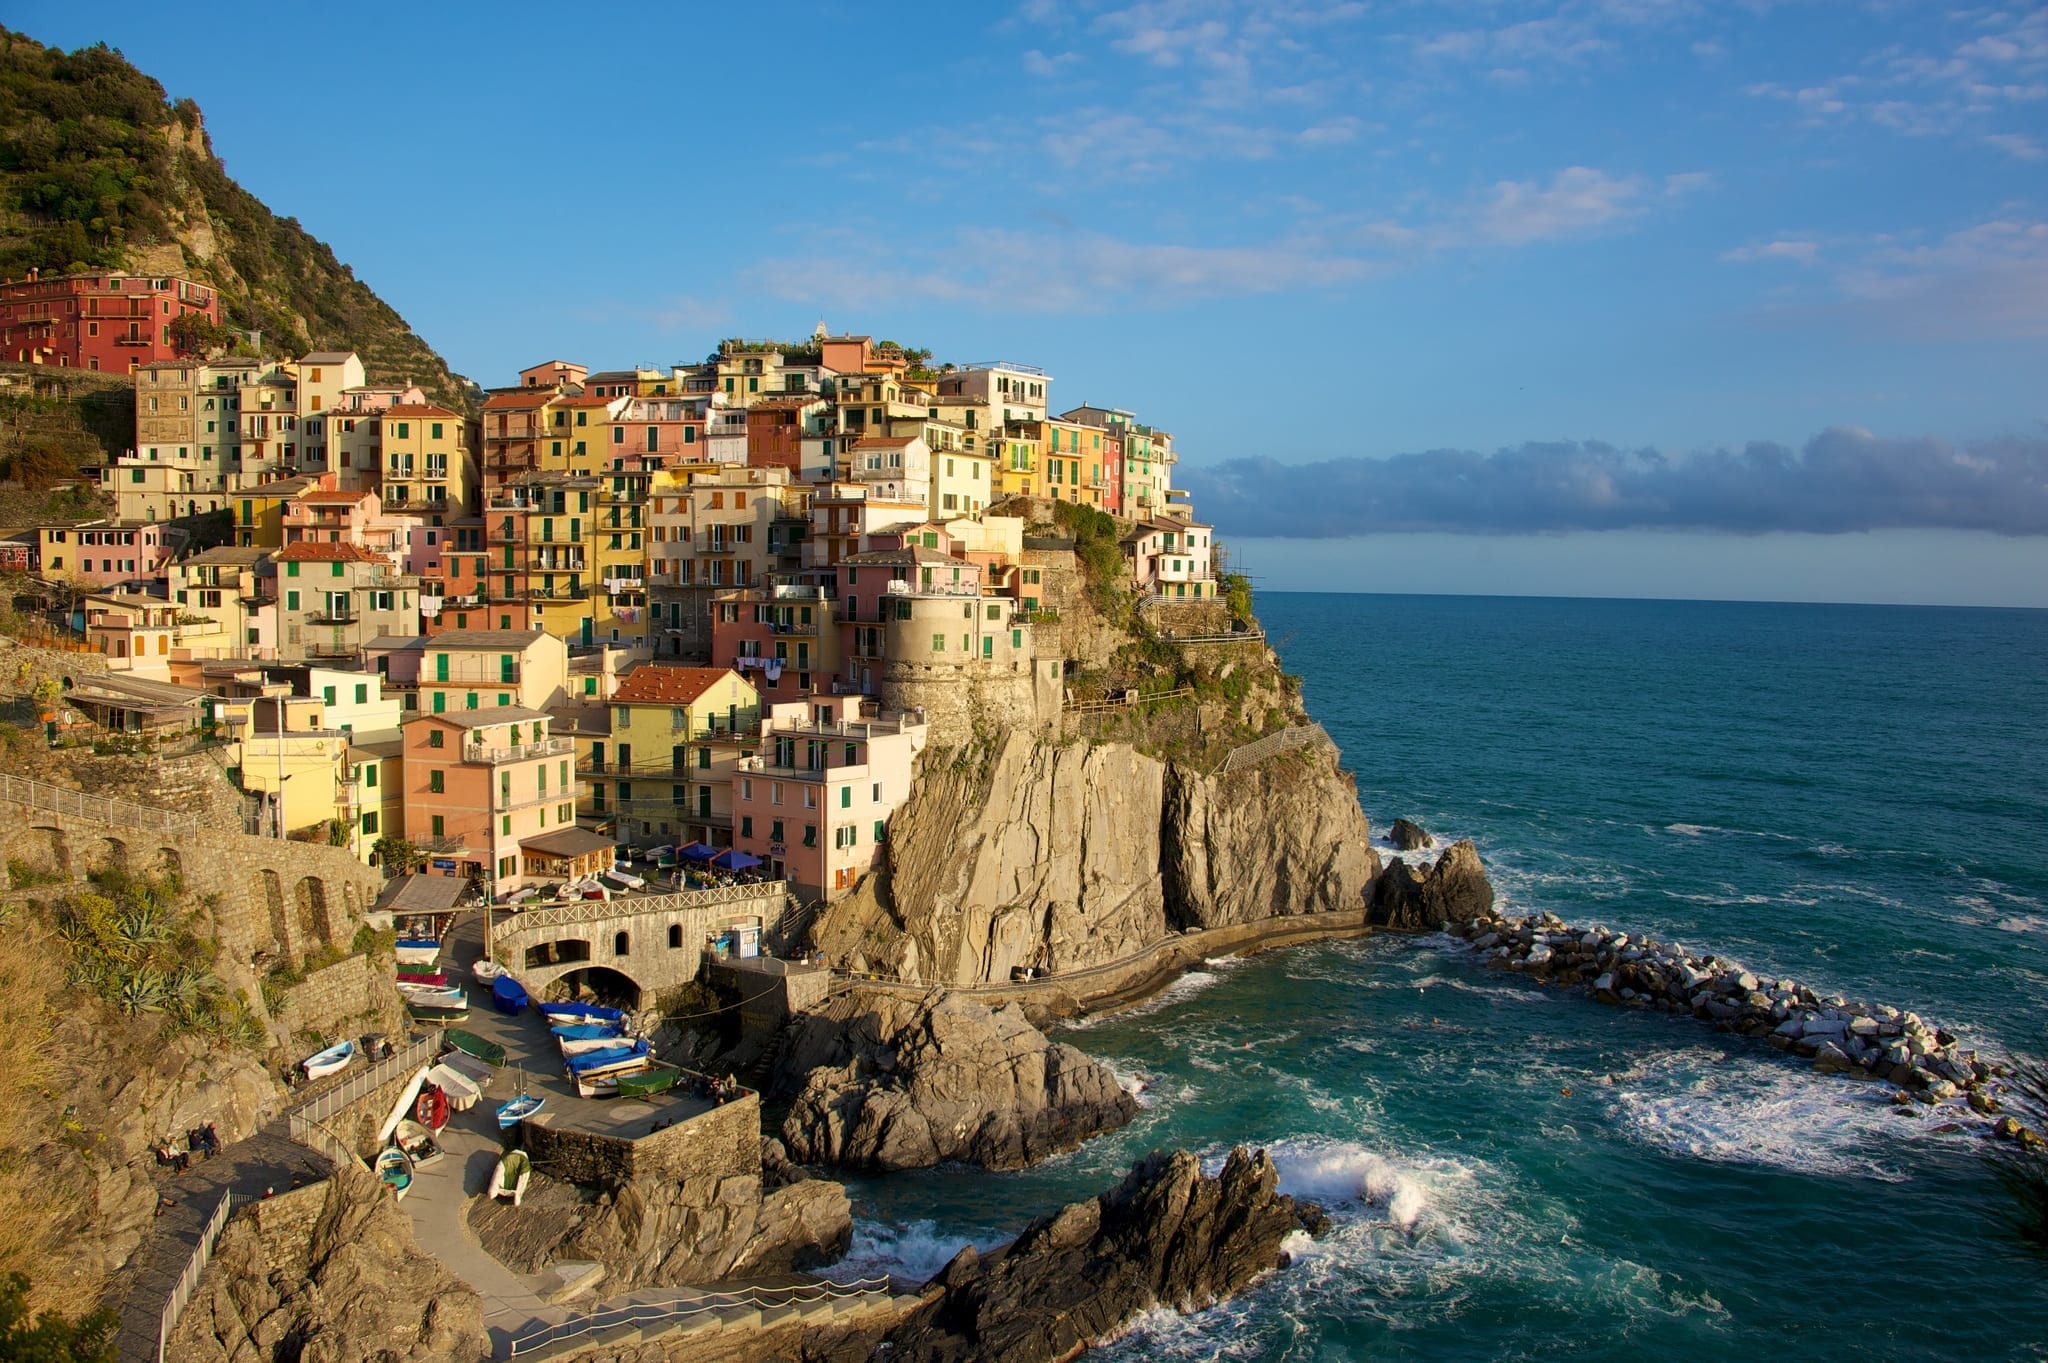 Aerial view of a town in Cinque Terre, showing the houses up the mountainside and the water down below